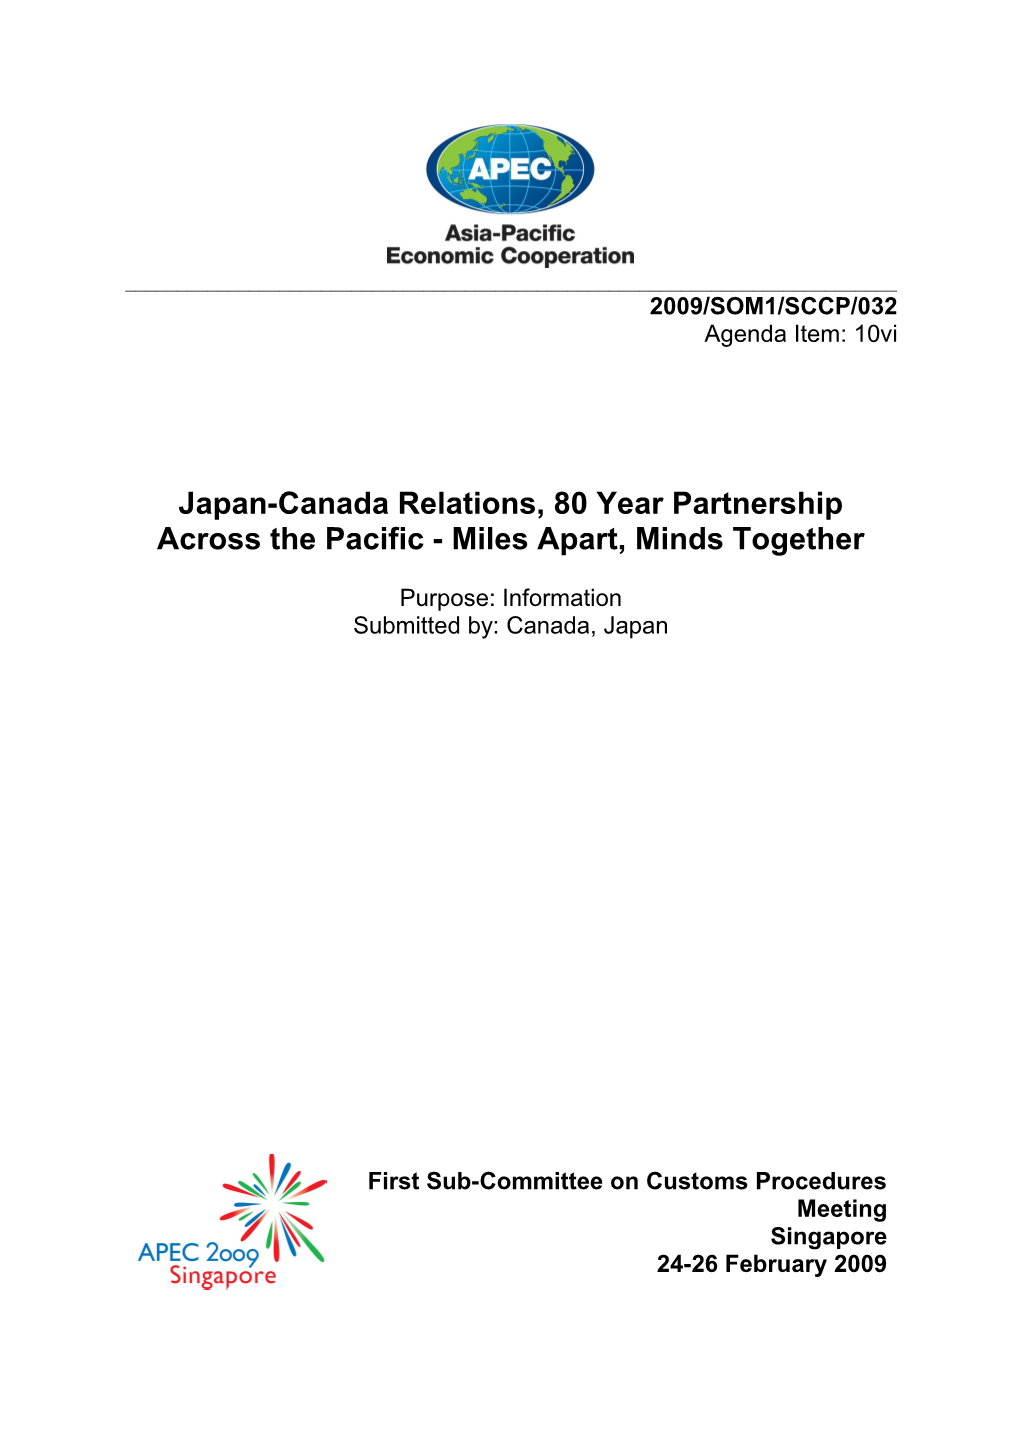 Japan-Canada Relations, 80 Year Partnership Across the Pacific